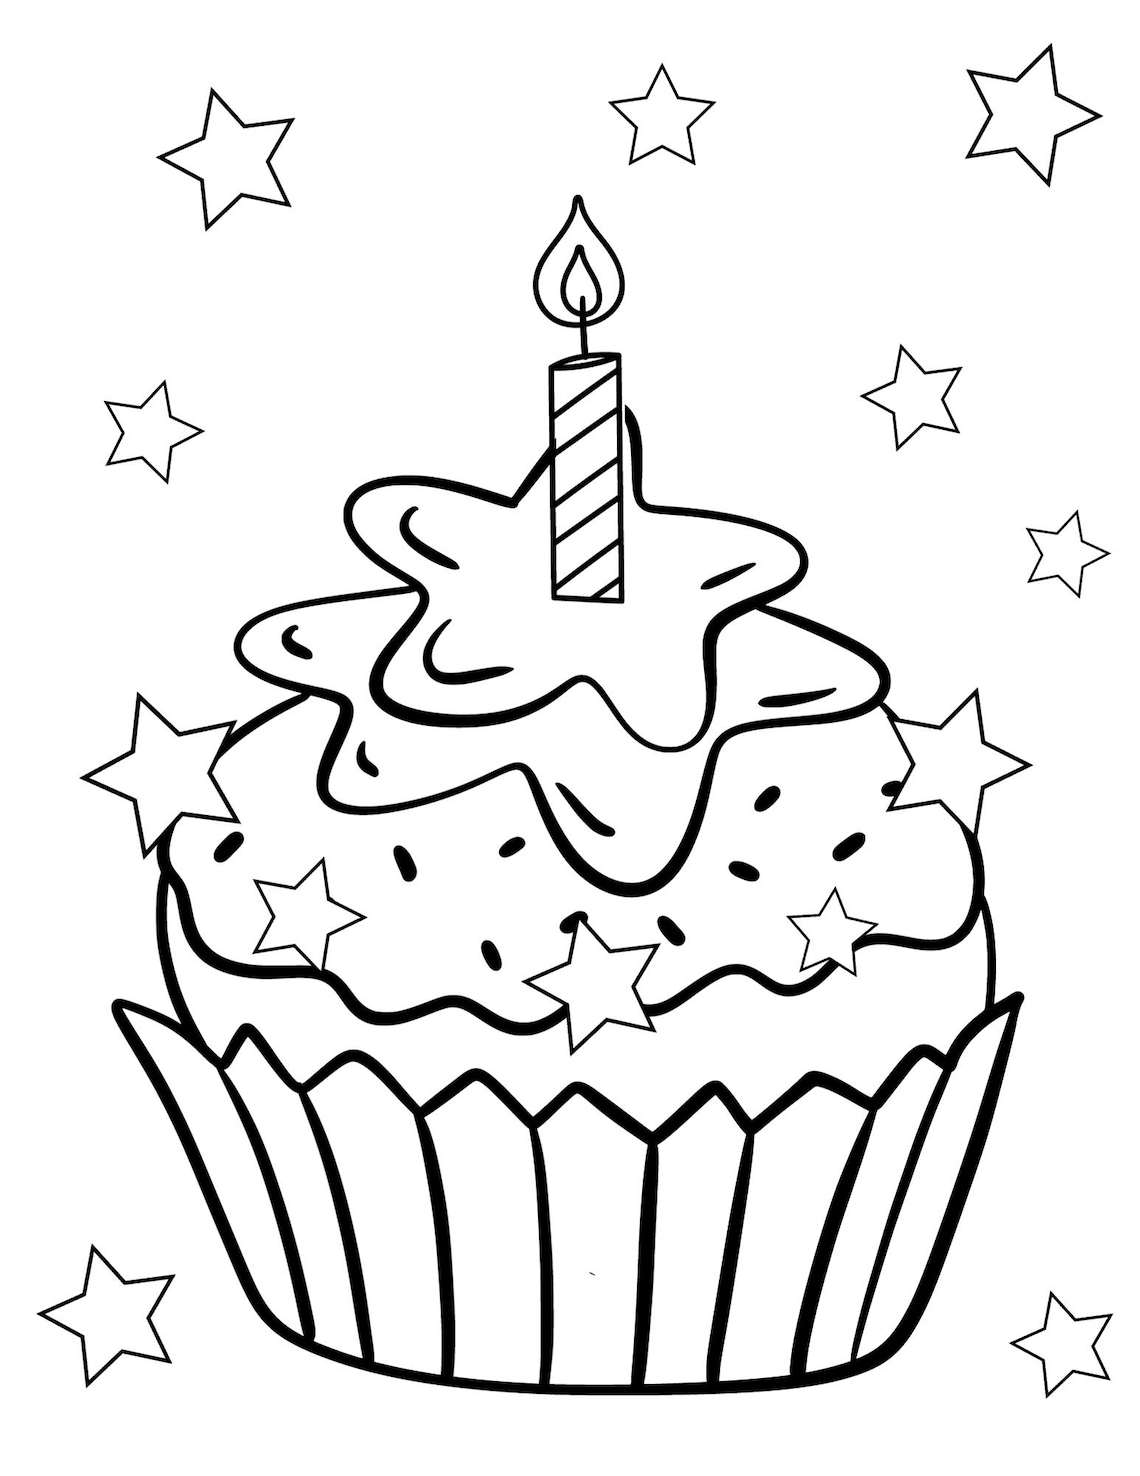 Cupcakes Coloring Pages Sweets Printables Cupcake Coloring - Etsy